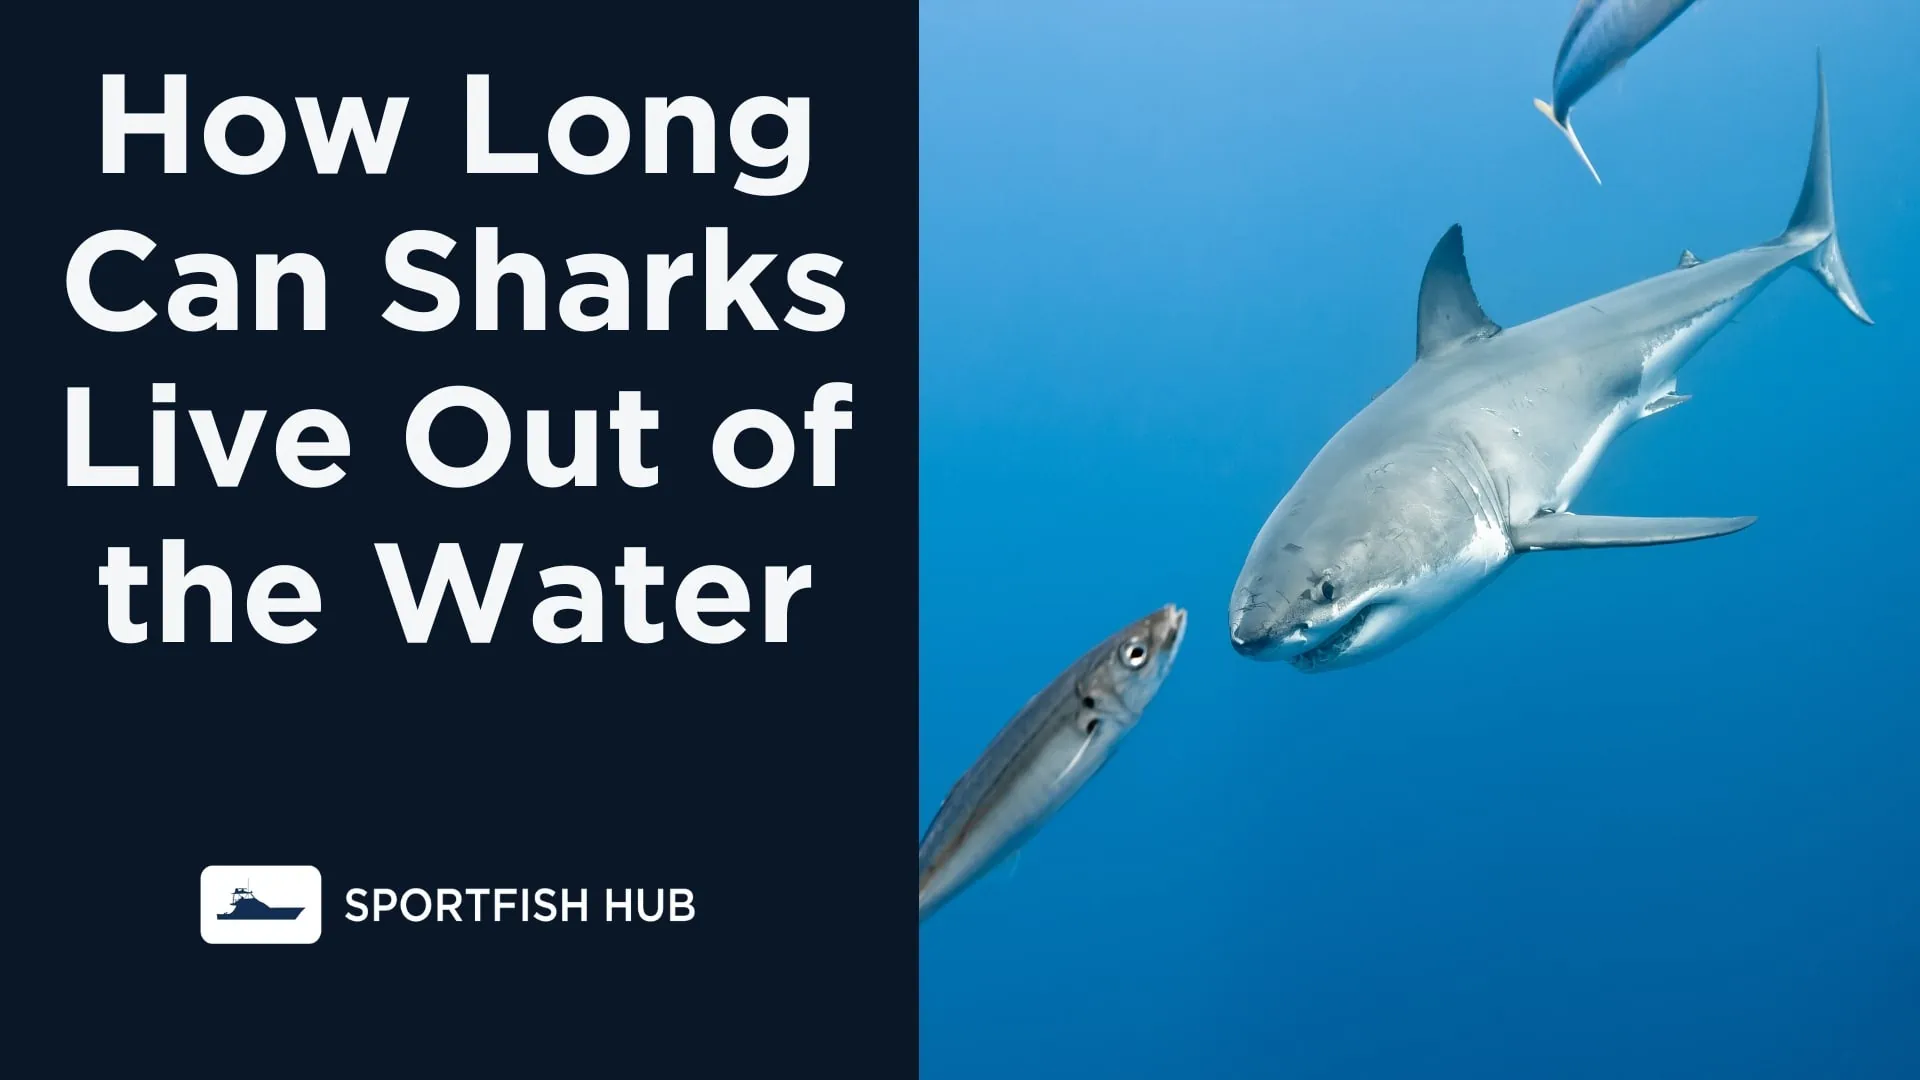 How Long Can Sharks Live Out of the Water